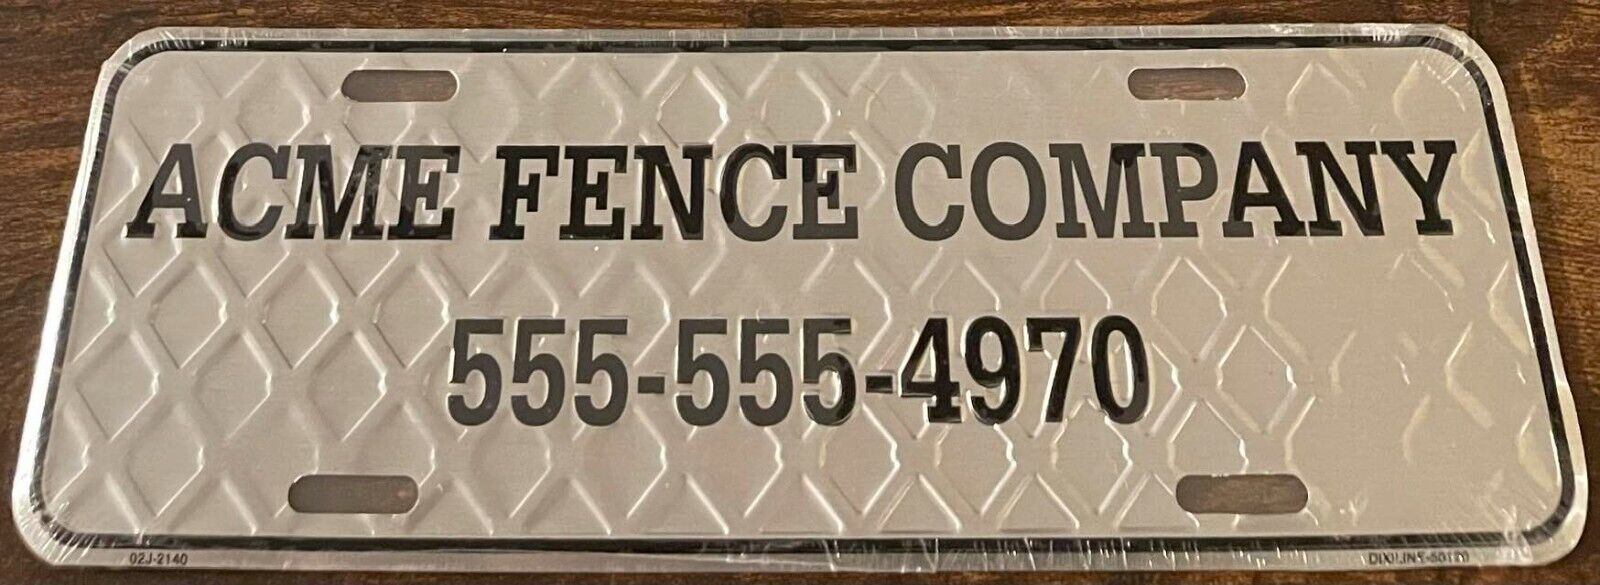 ACME Fence Company Booster License Plate 555-555-4970 Chain Link Fence Privacy